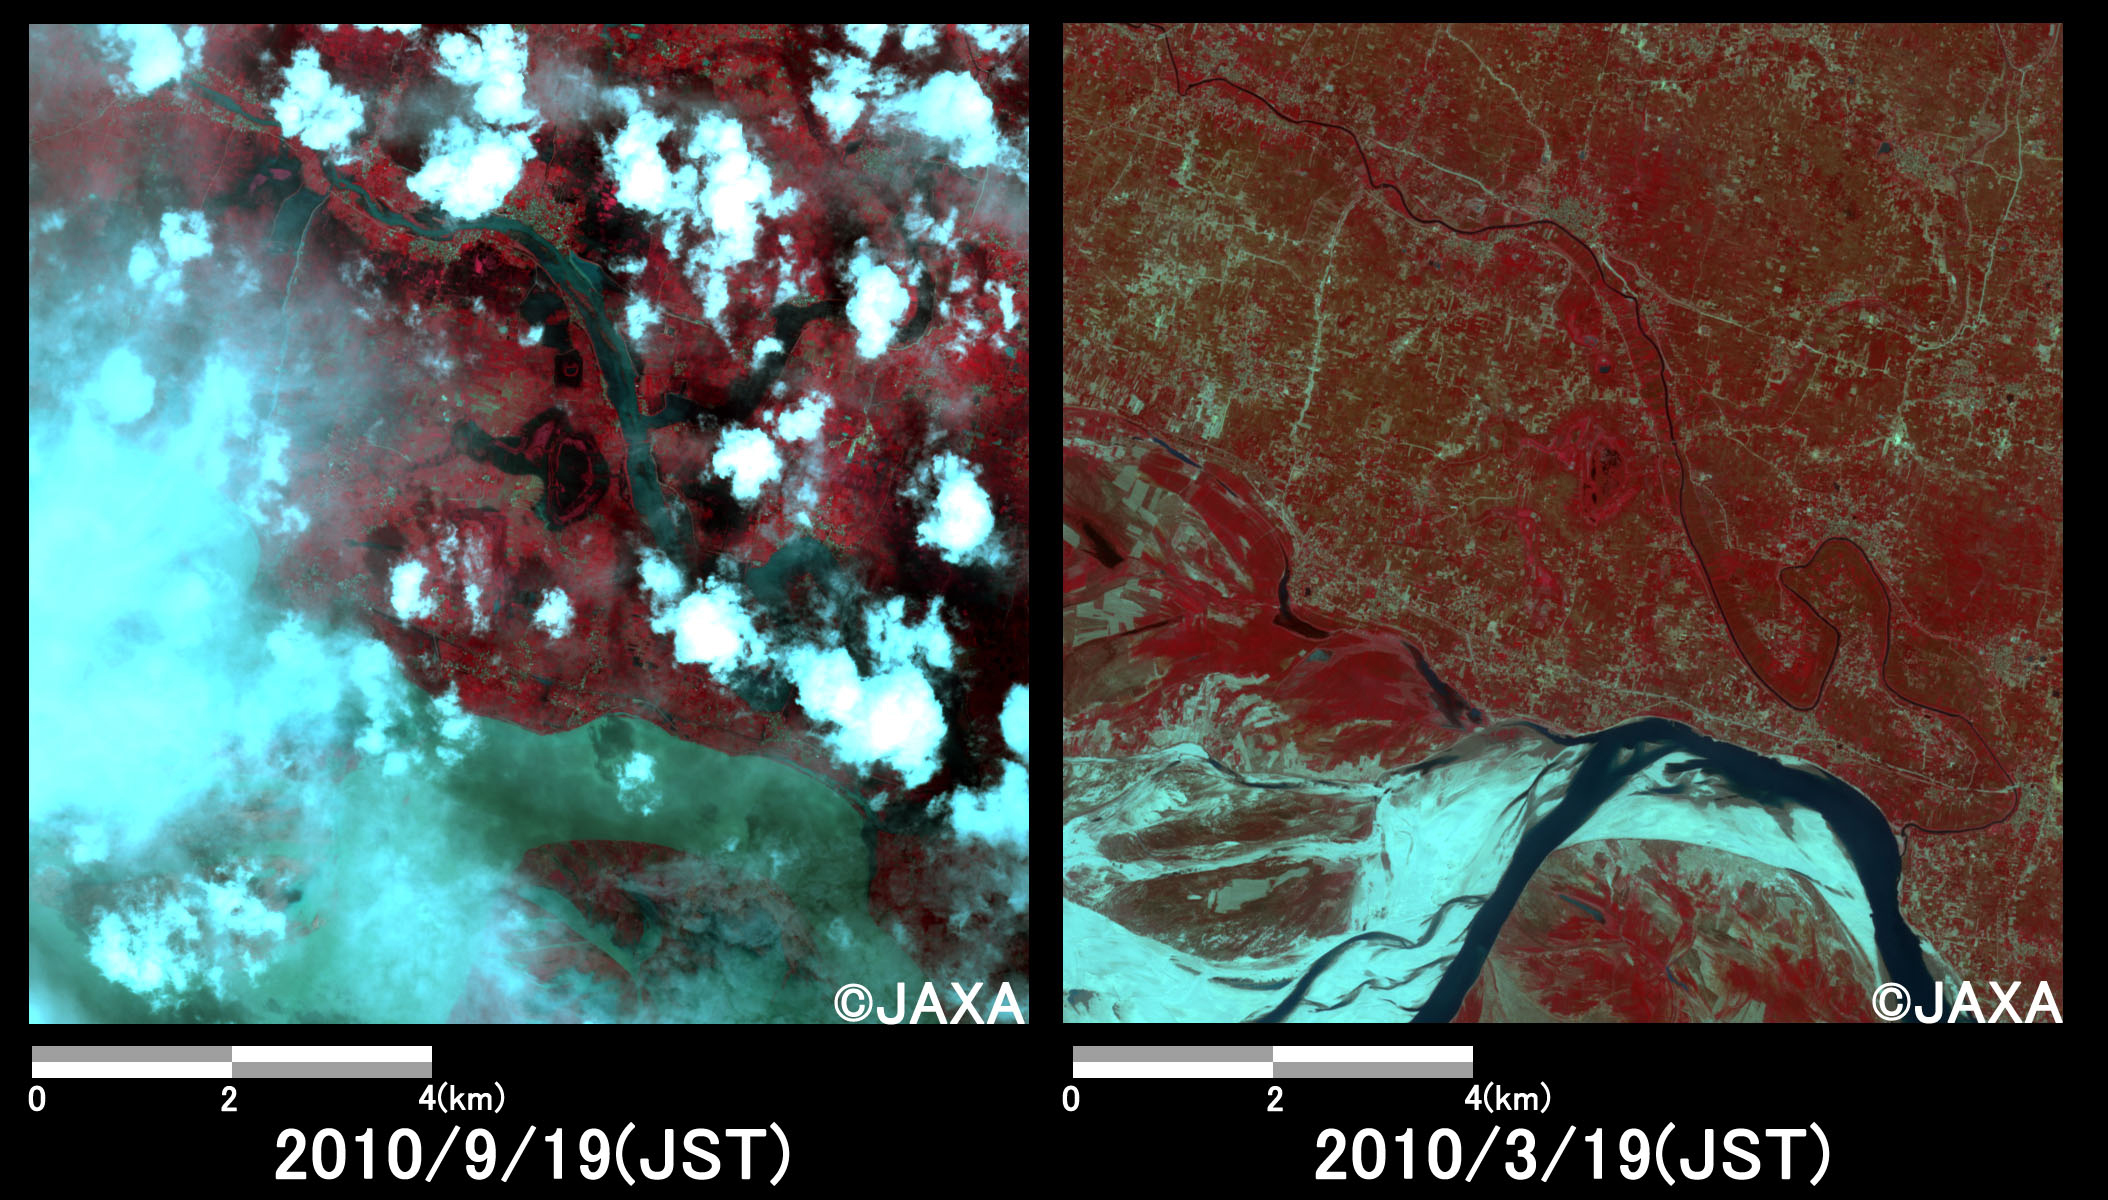 Fig. 3: Enlarged images at the swollen river at Siswan (100 square kilometers, left: September 19, 2010; right: March 19, 2010).